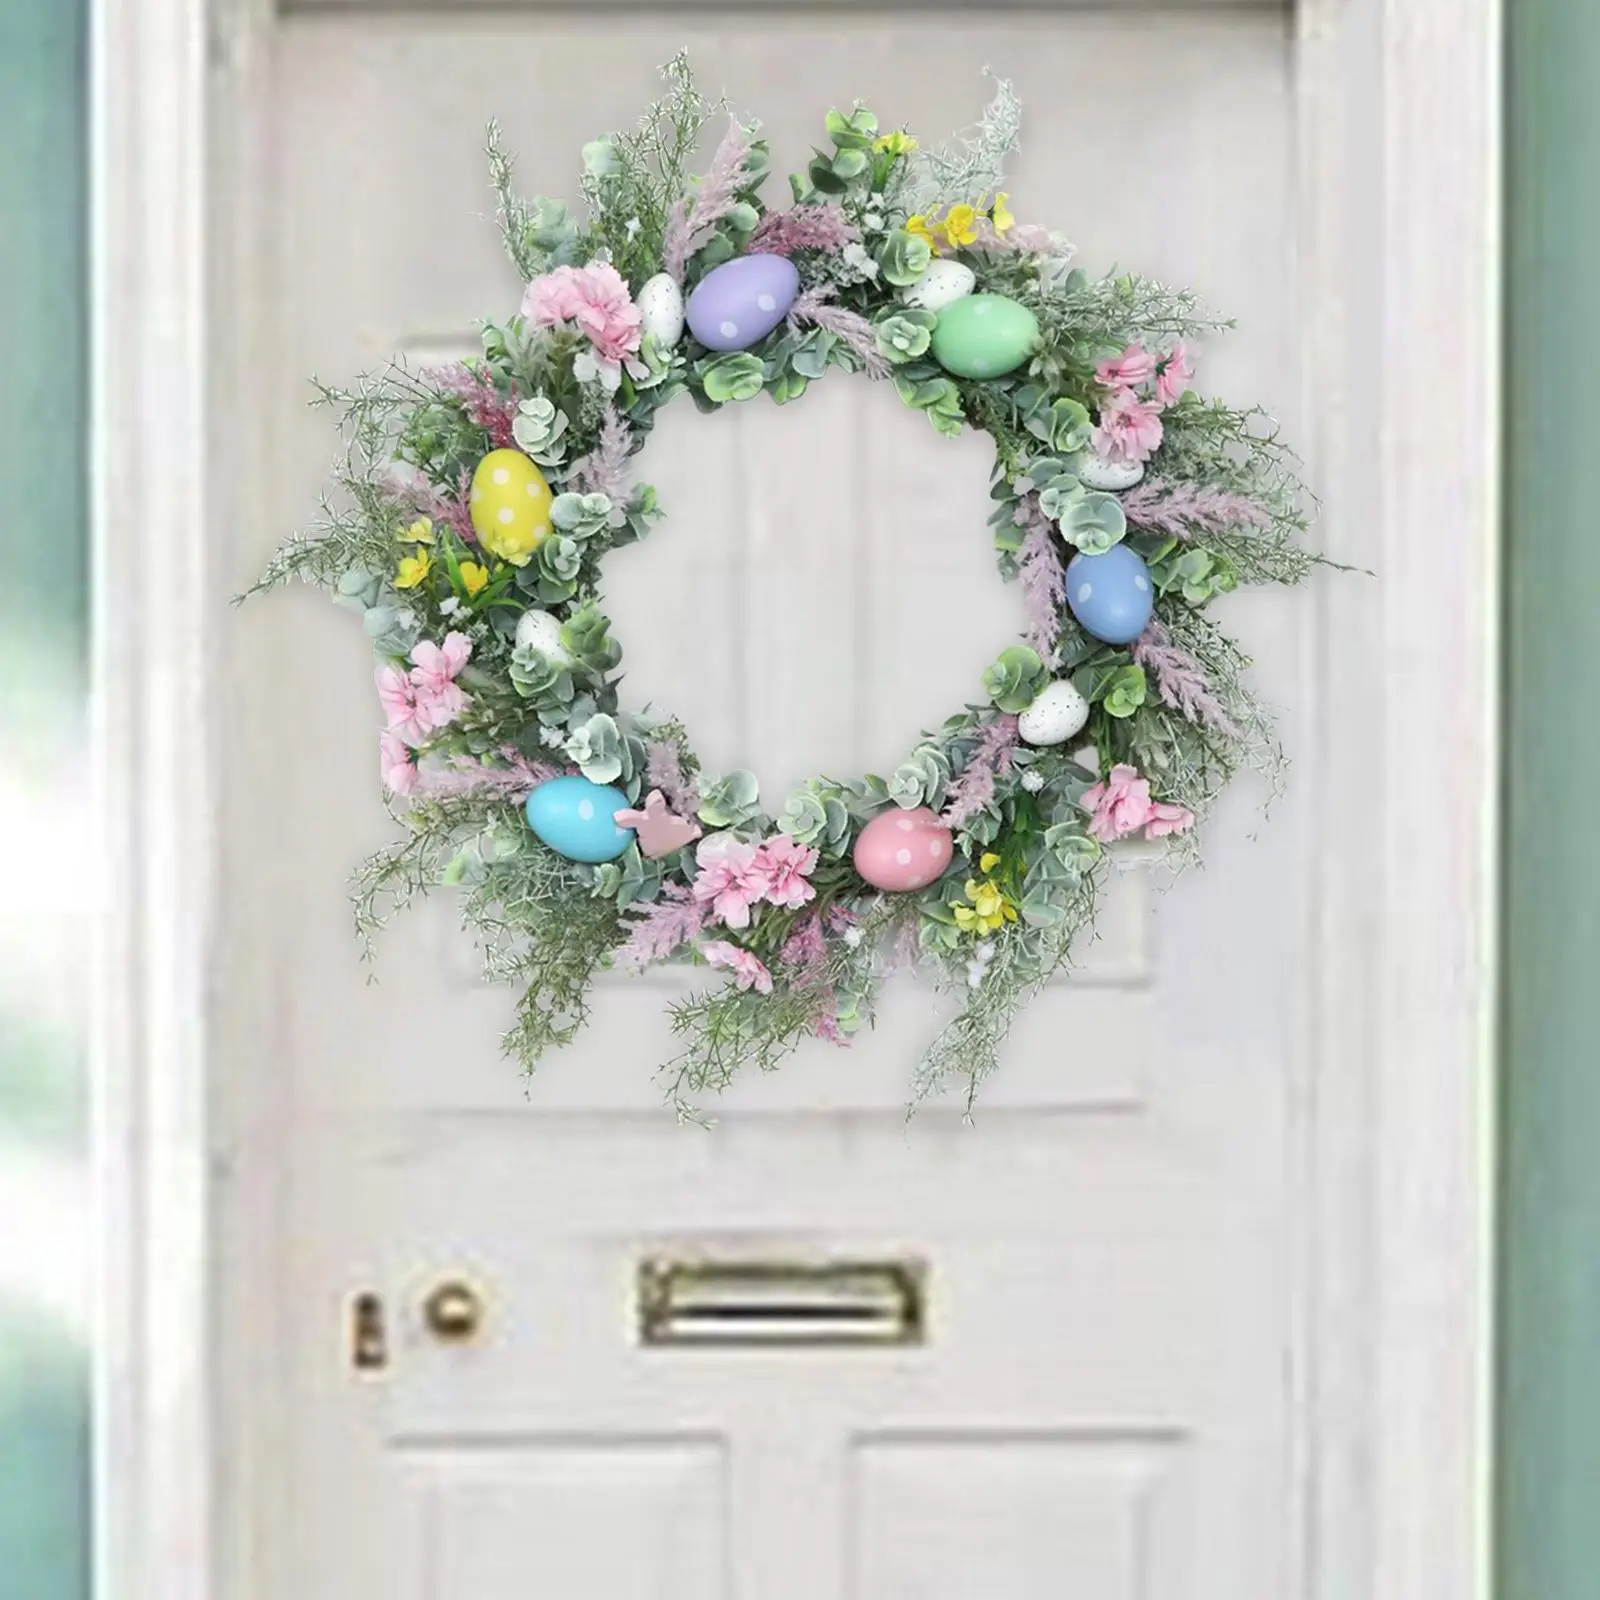 45cm Easter Egg Flower Garland, Front Door Wall Hanging, Window Decorative Greenery Garland for Home Decor